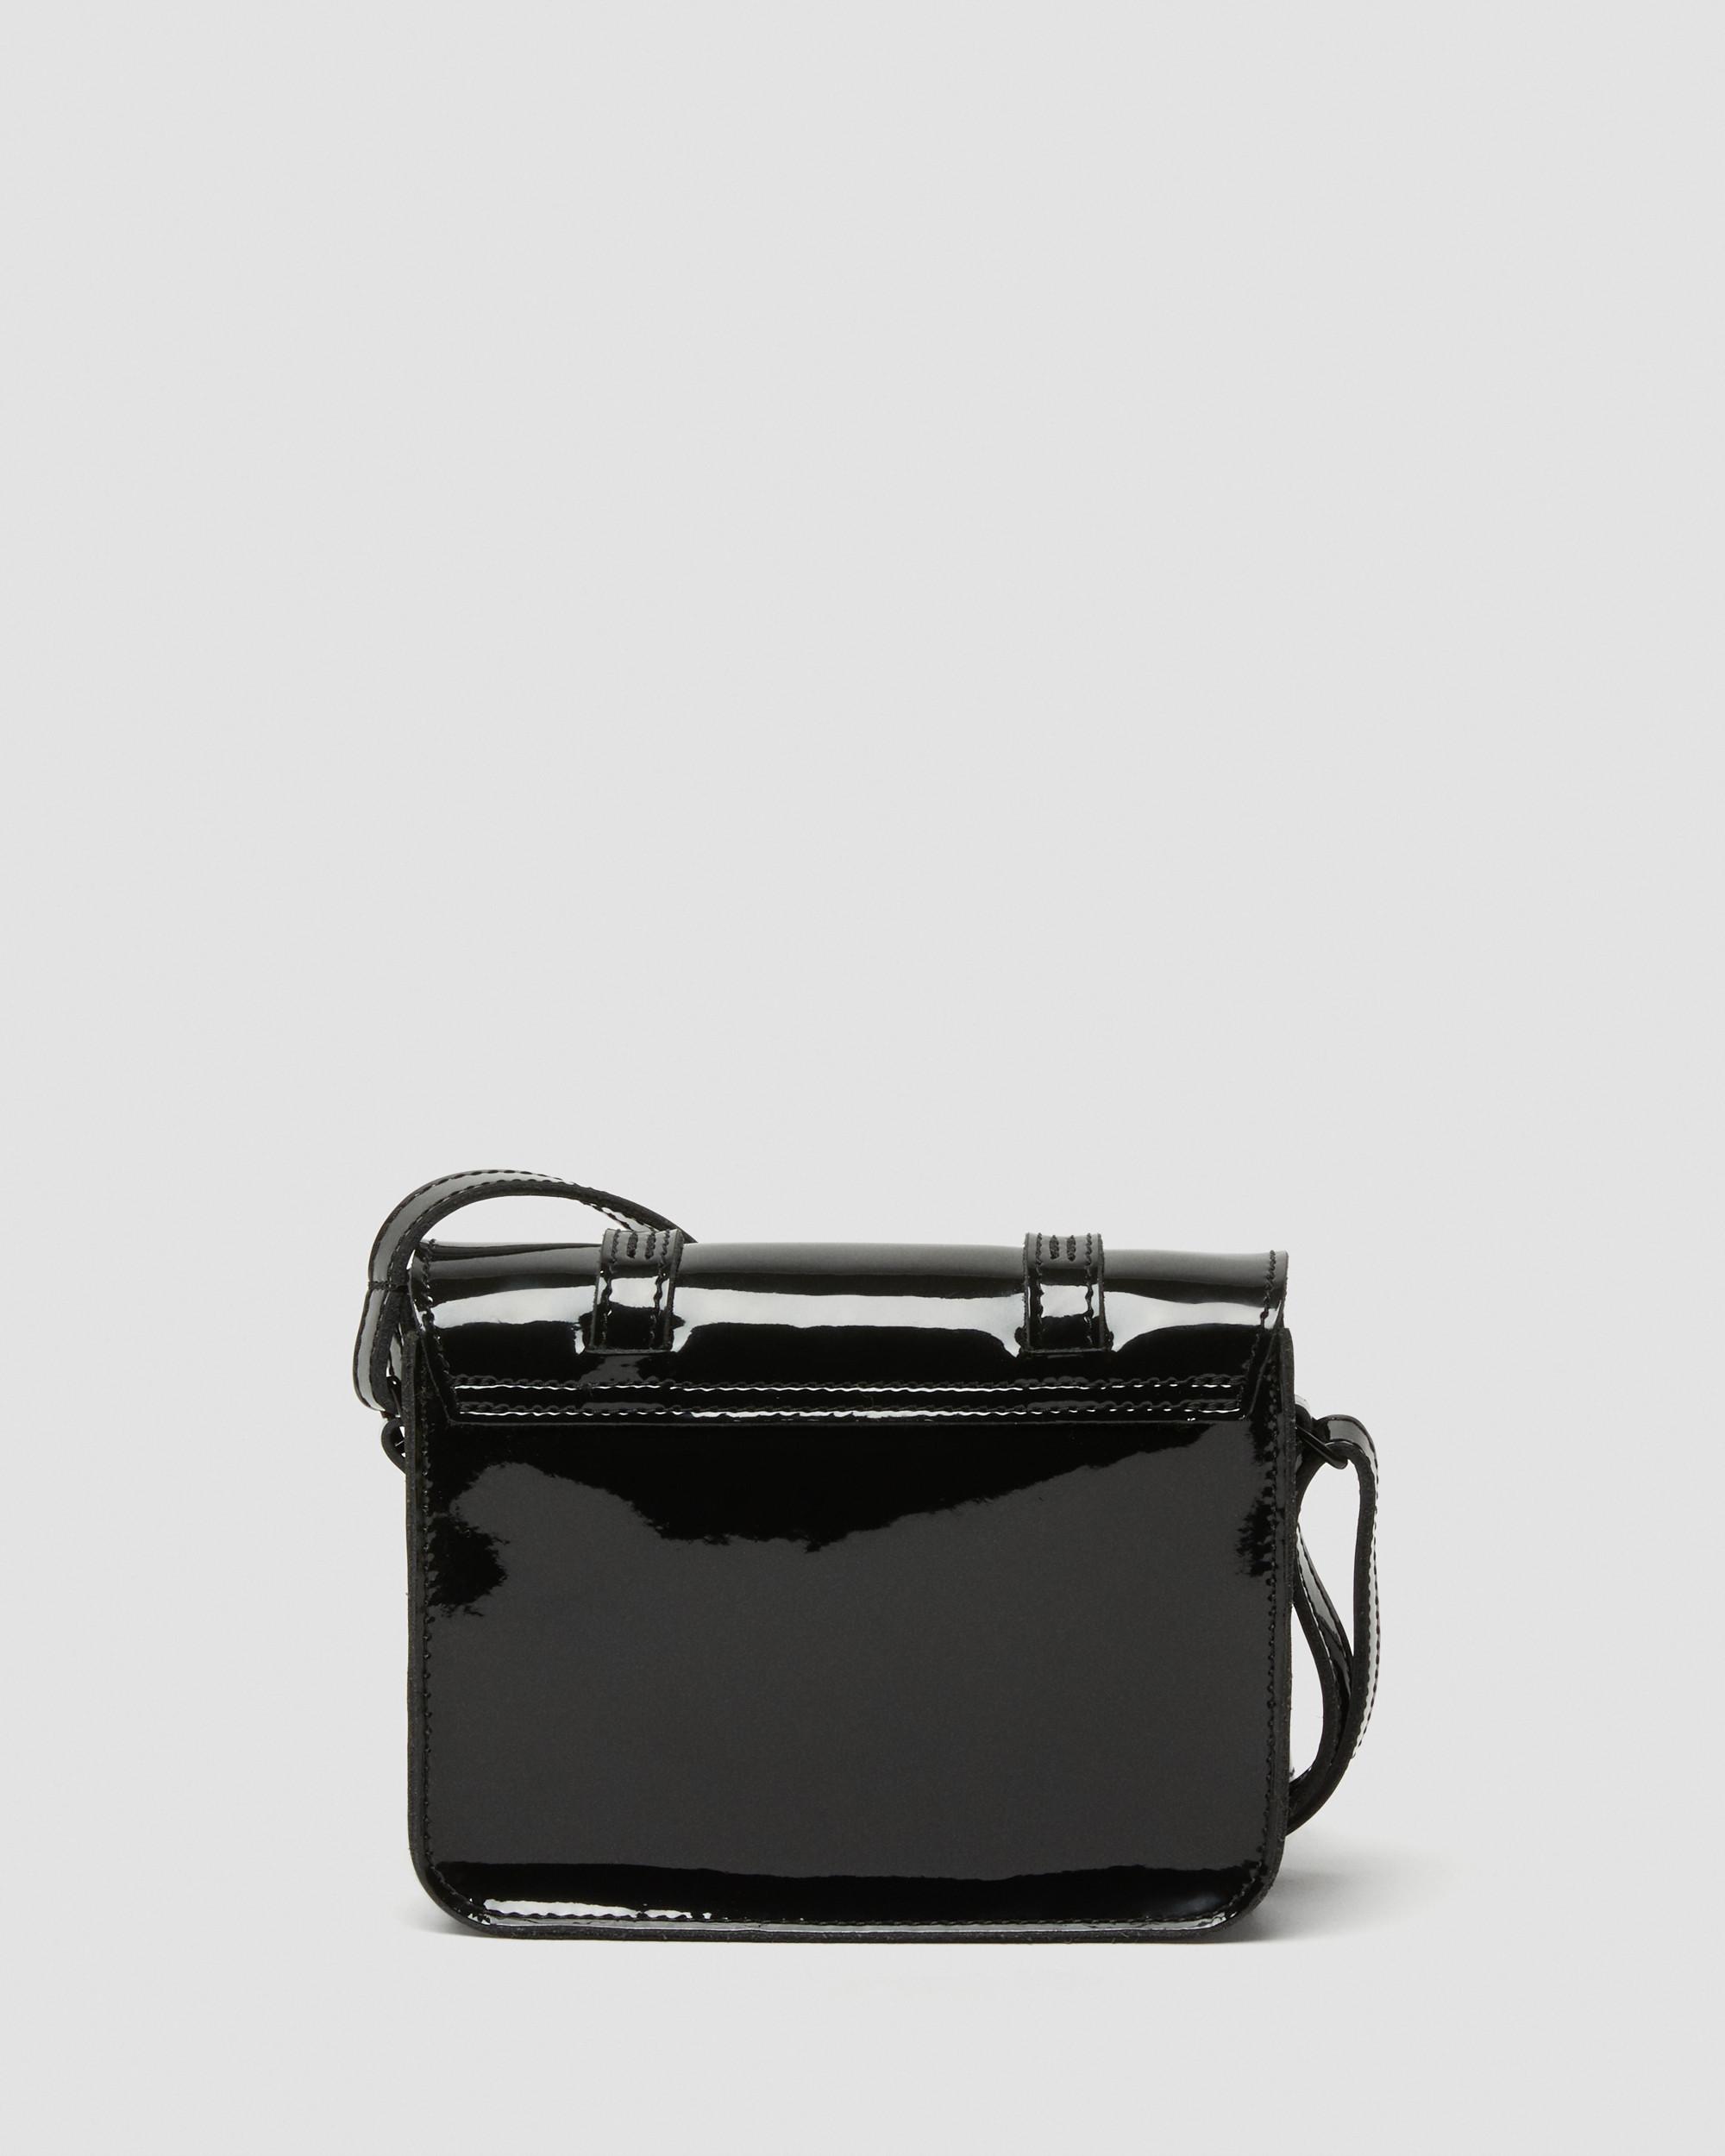 DR MARTENS 7 inch Patent Leather Crossbody Bag